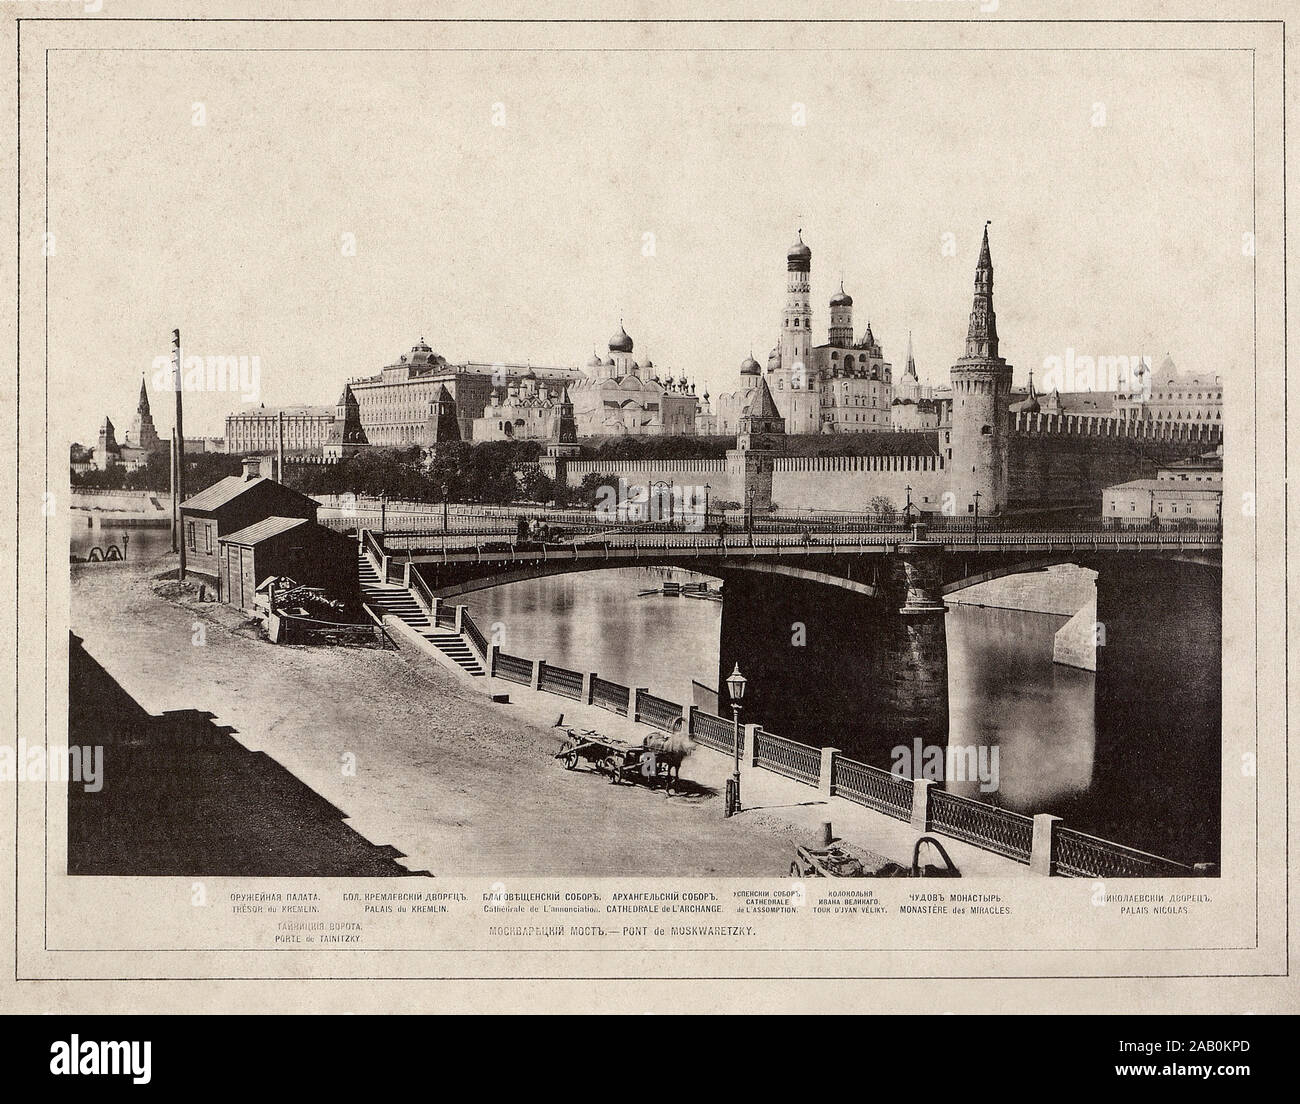 Moskvoretsky Bridge (old) is a bridge that spans the Moskva River in Moscow, Russia, immediately east of the Kremlin. The bridge connects Red Square w Stock Photo